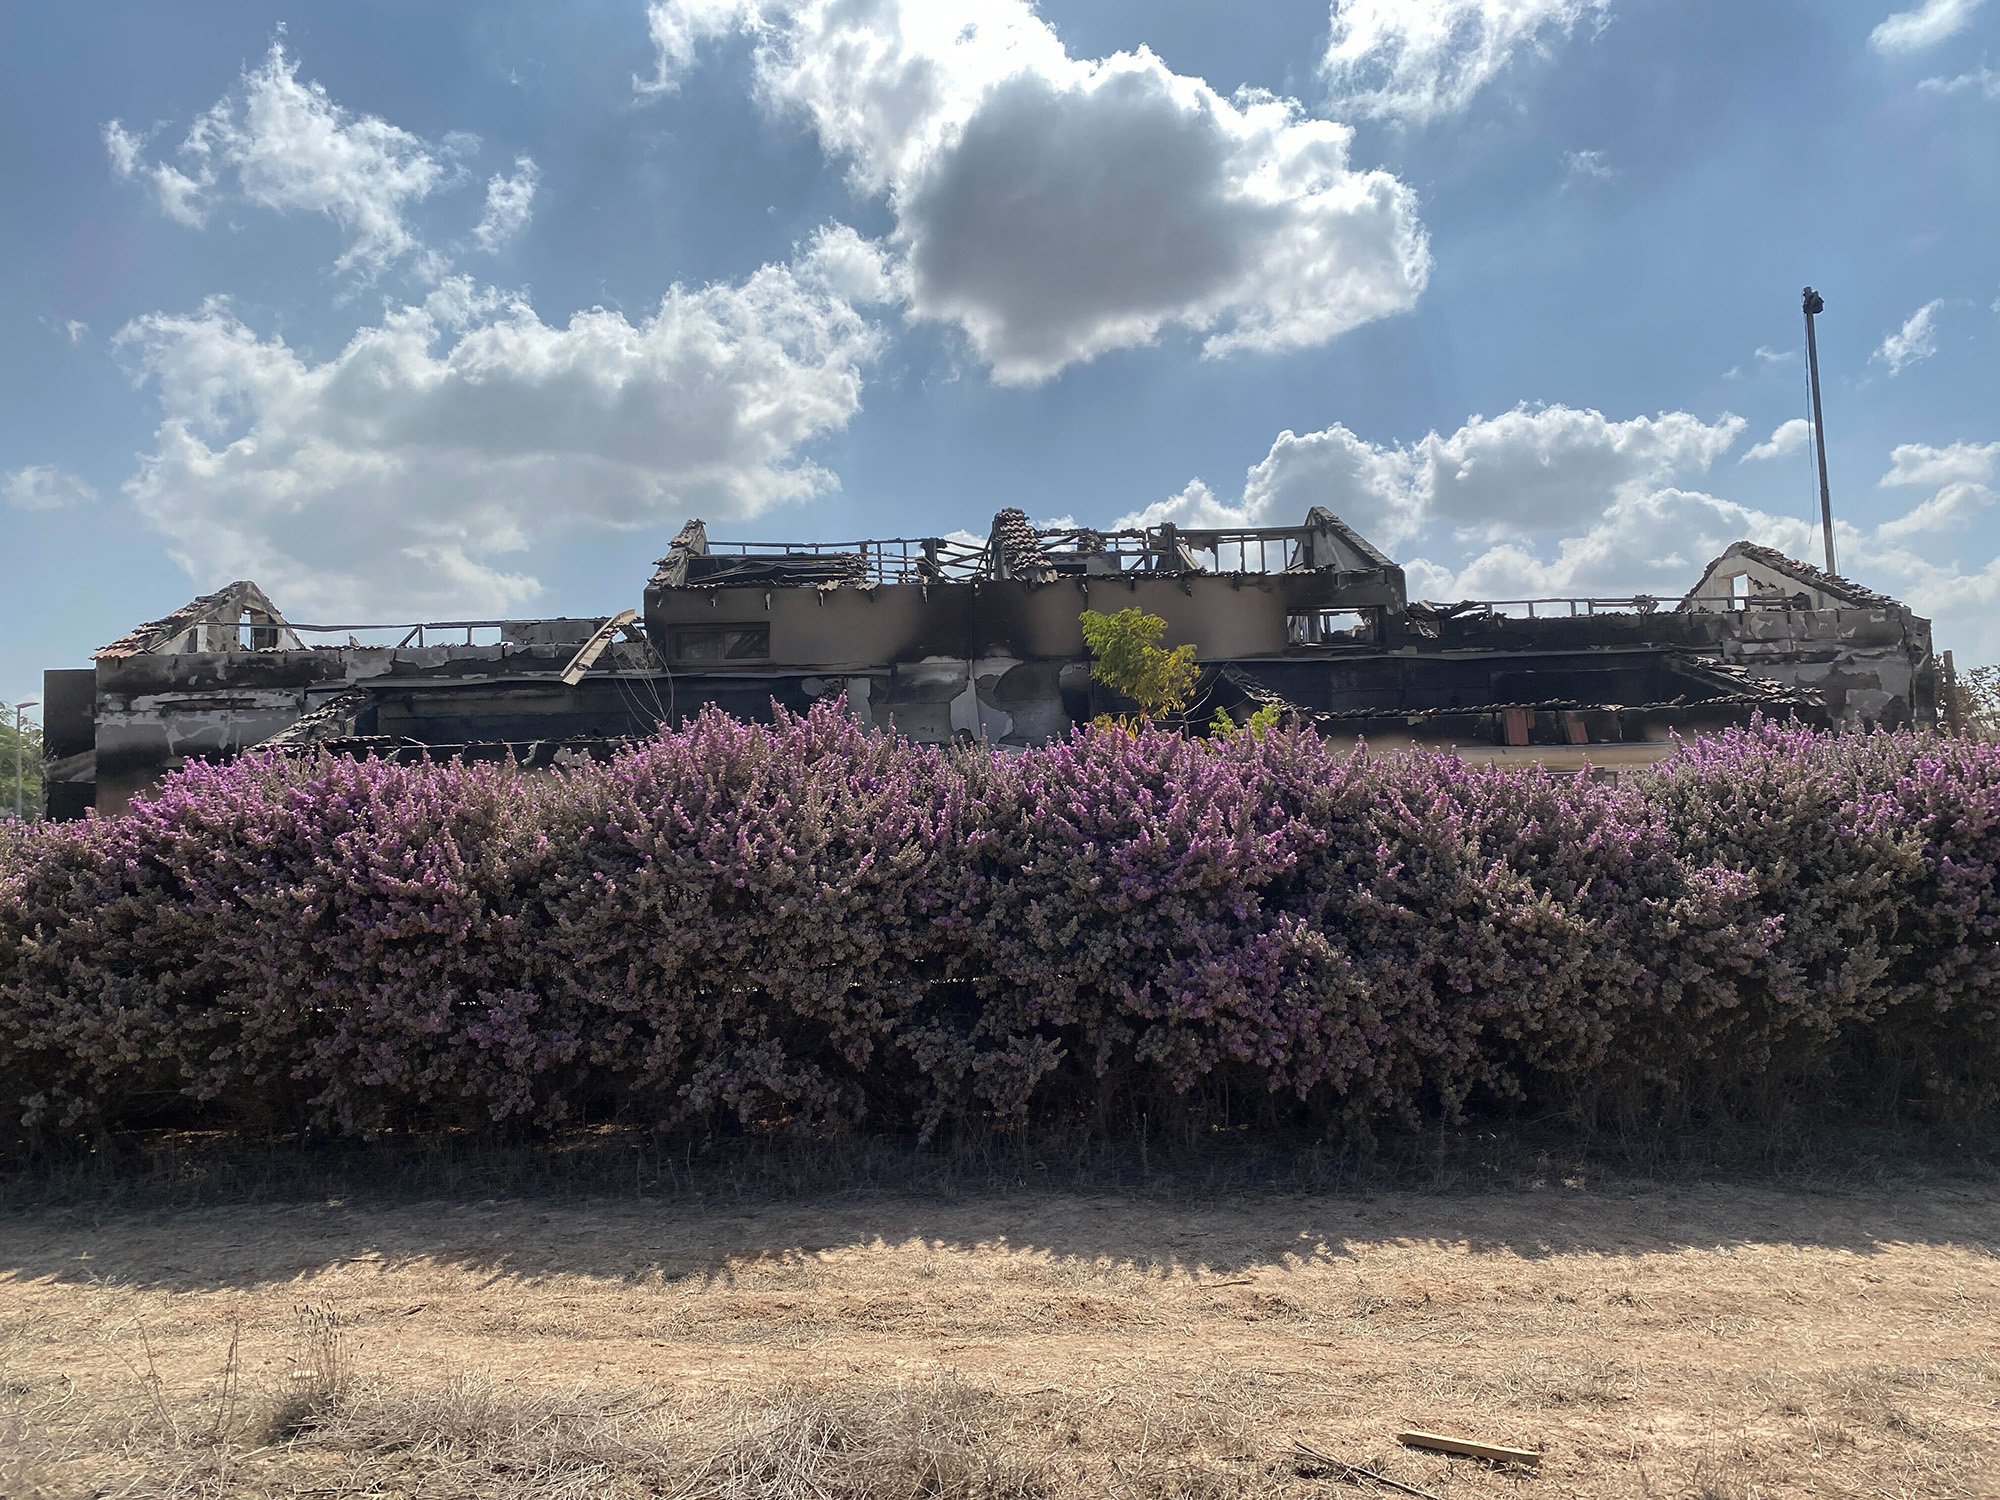 The charred remains of kibbutz Be’eri, Israel, on October 20.